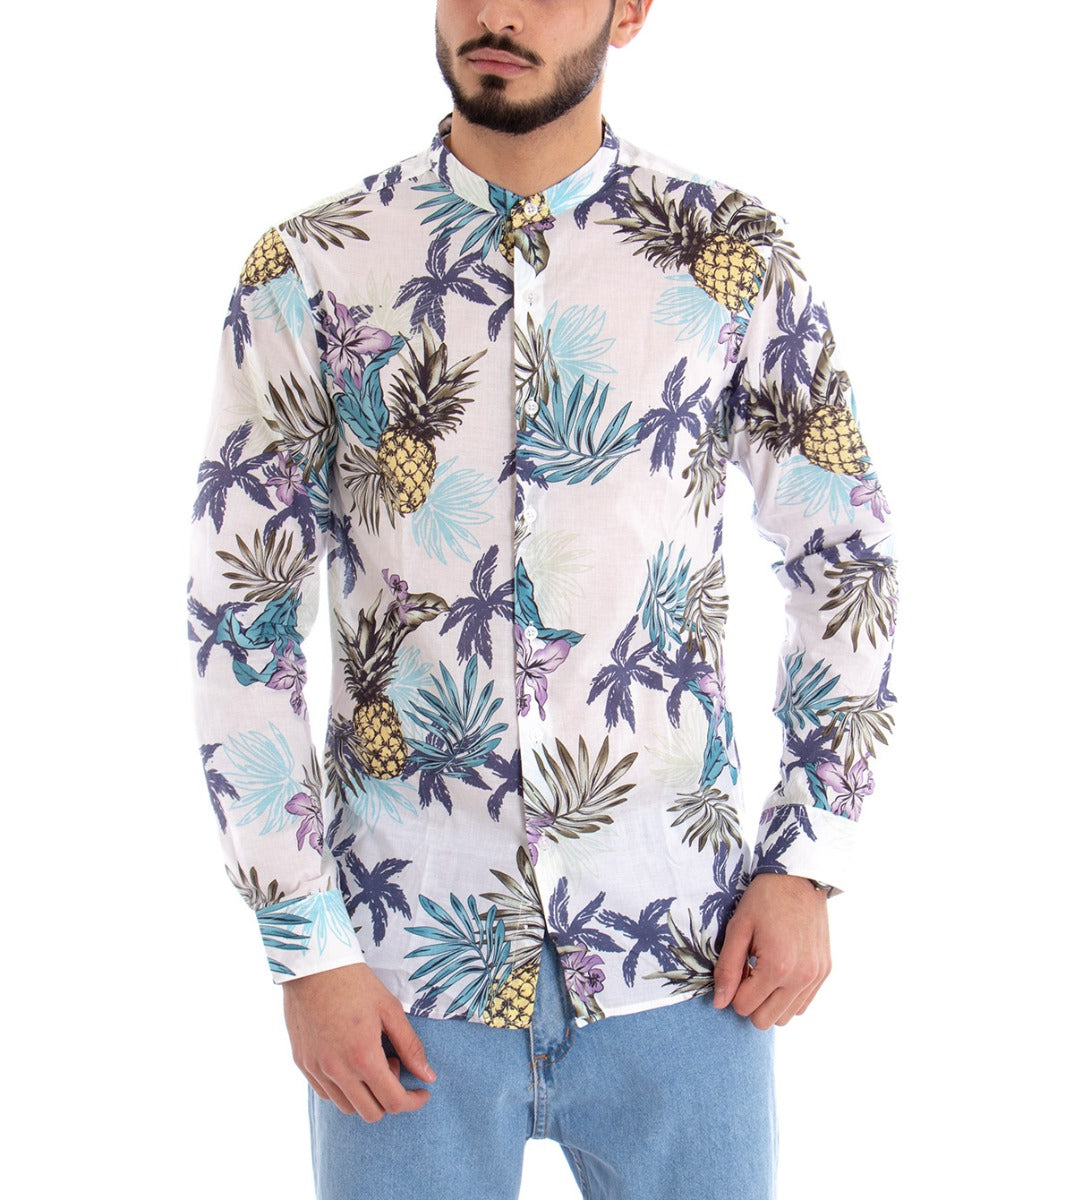 Men's Shirt With Collar Long Sleeves White Floral Cotton GIOSAL-C1518A